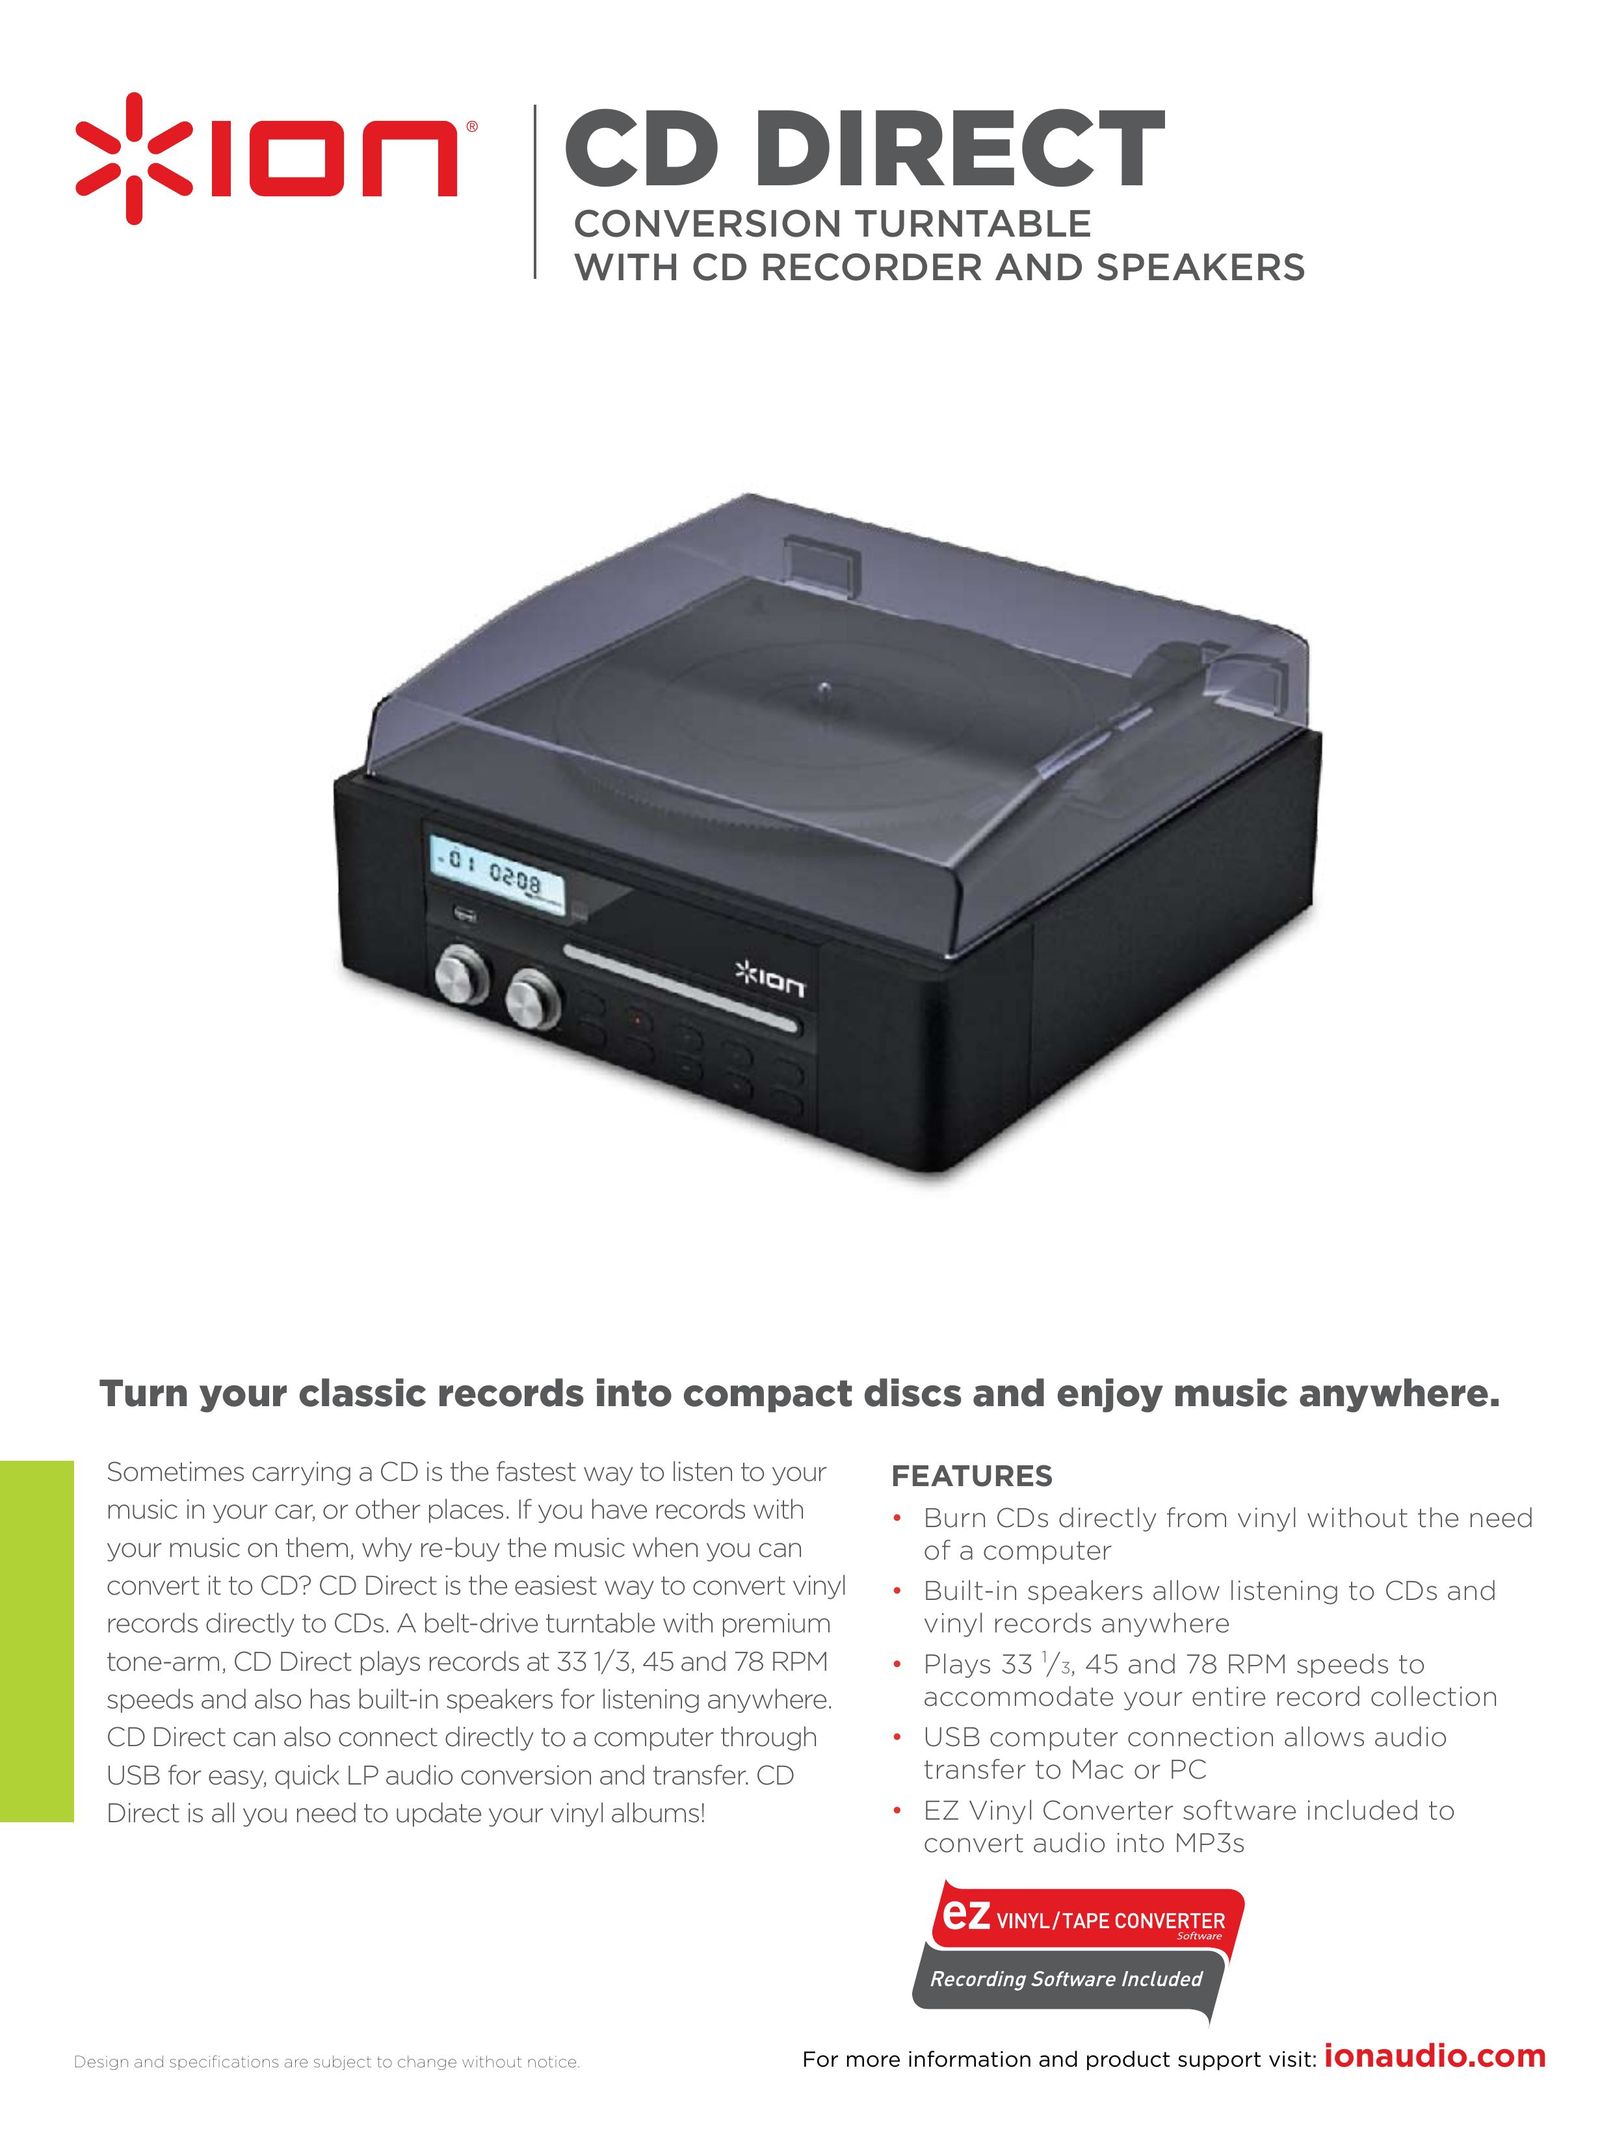 ION CD DIRECT Turntable User Manual